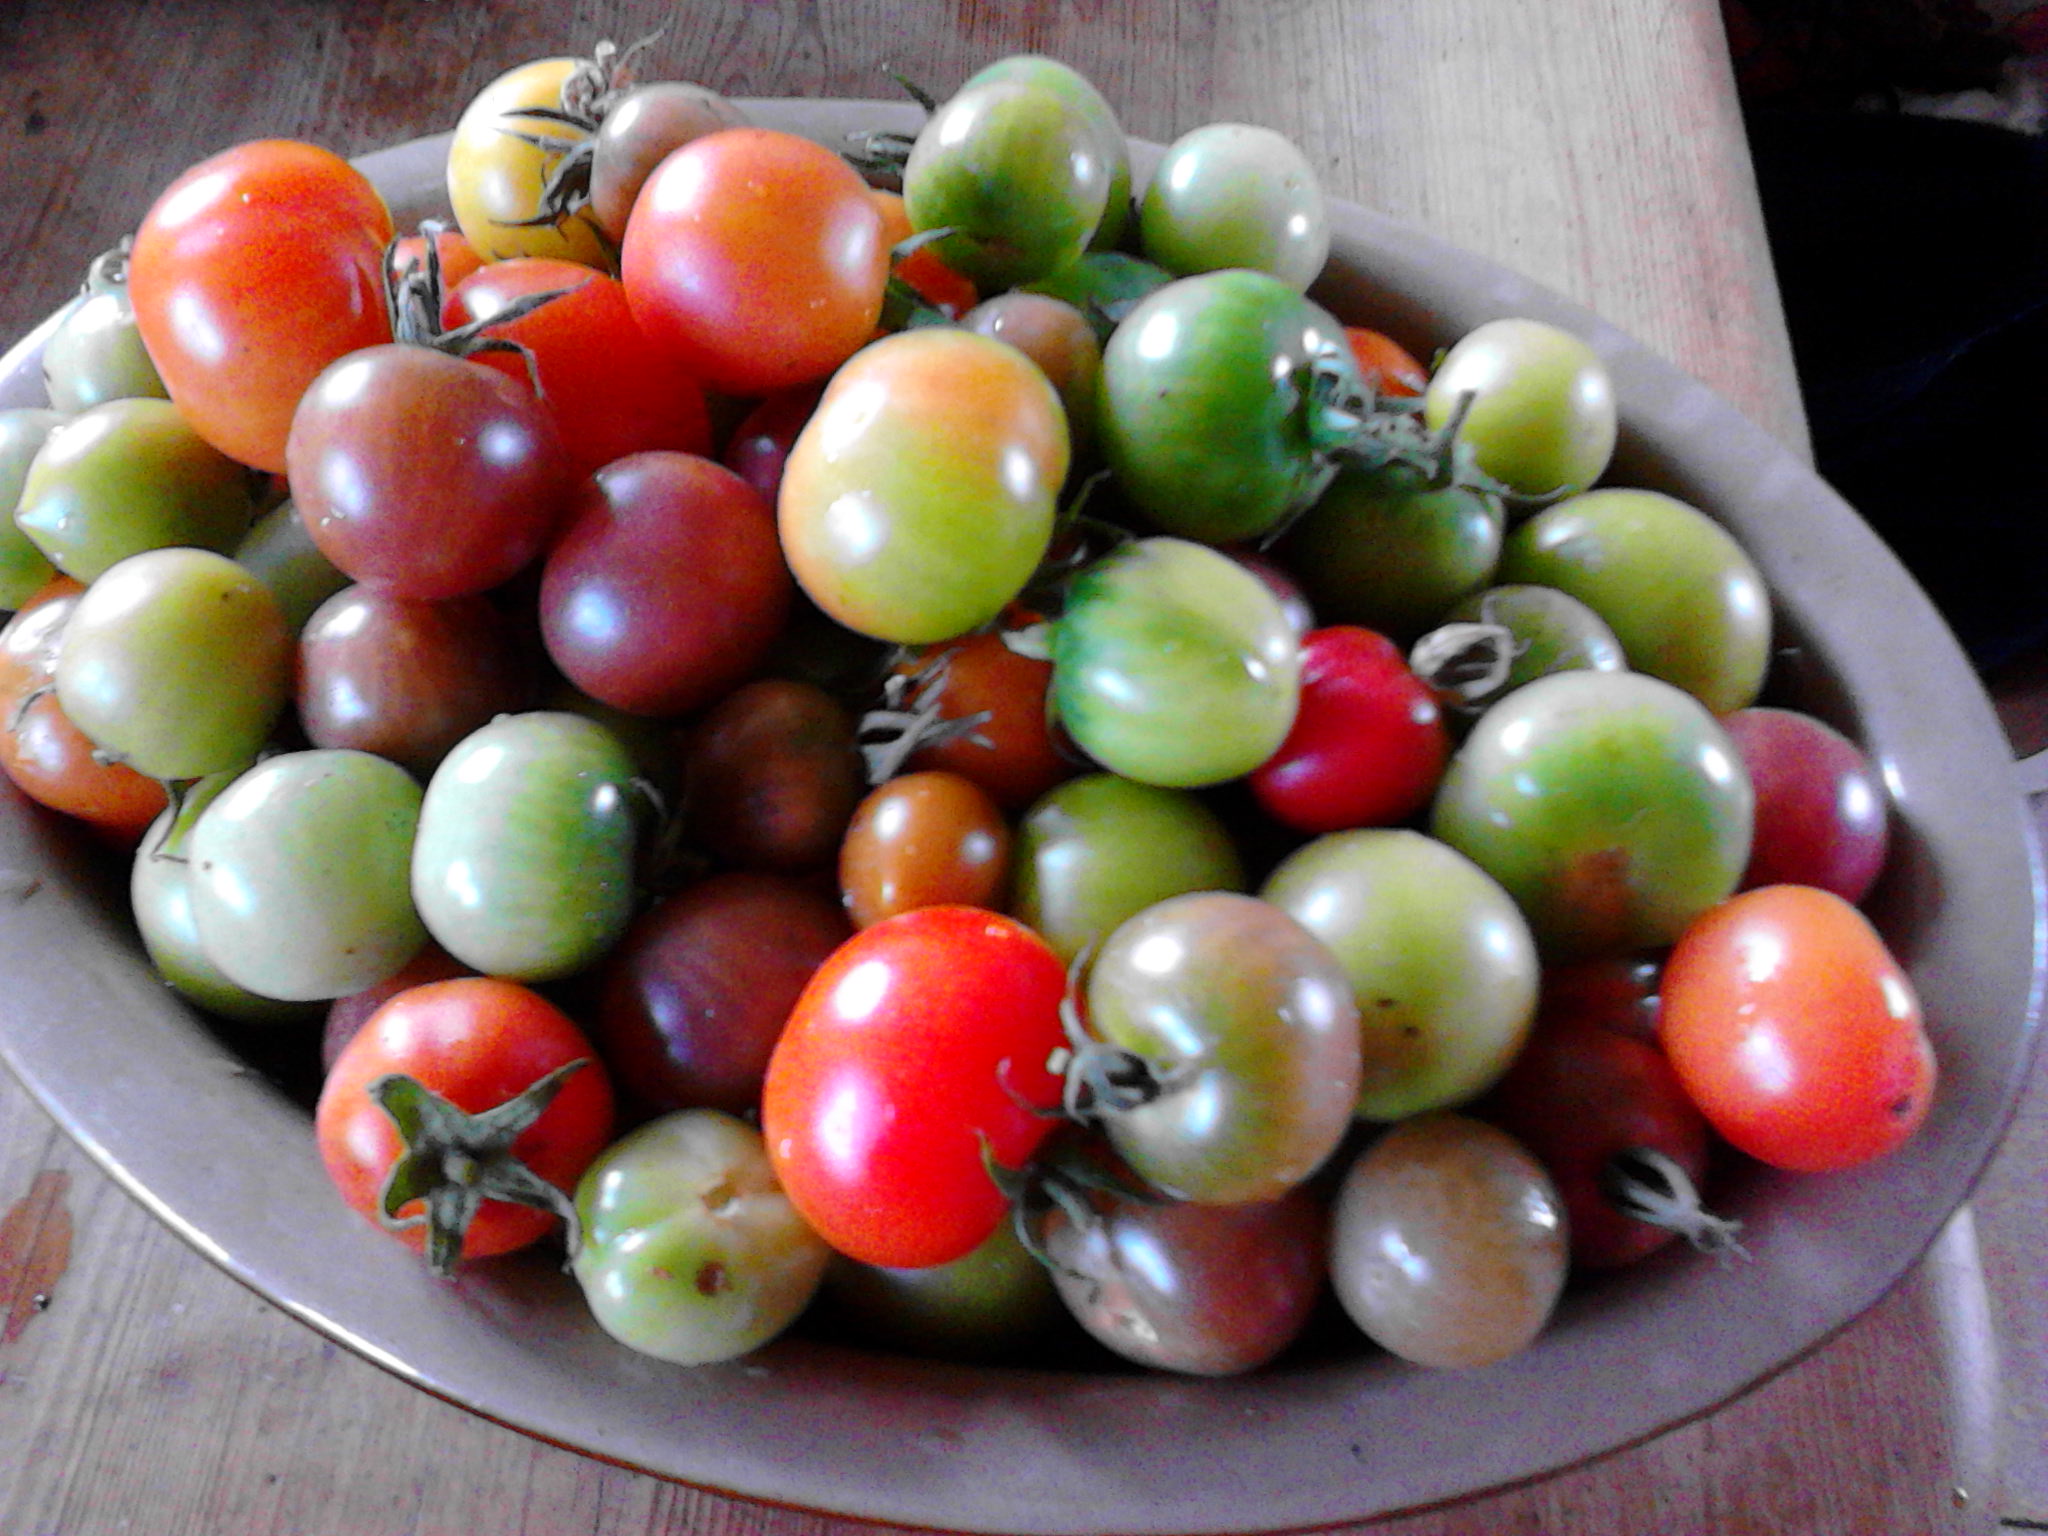 The last of this year's tomatoes. 5lb here.